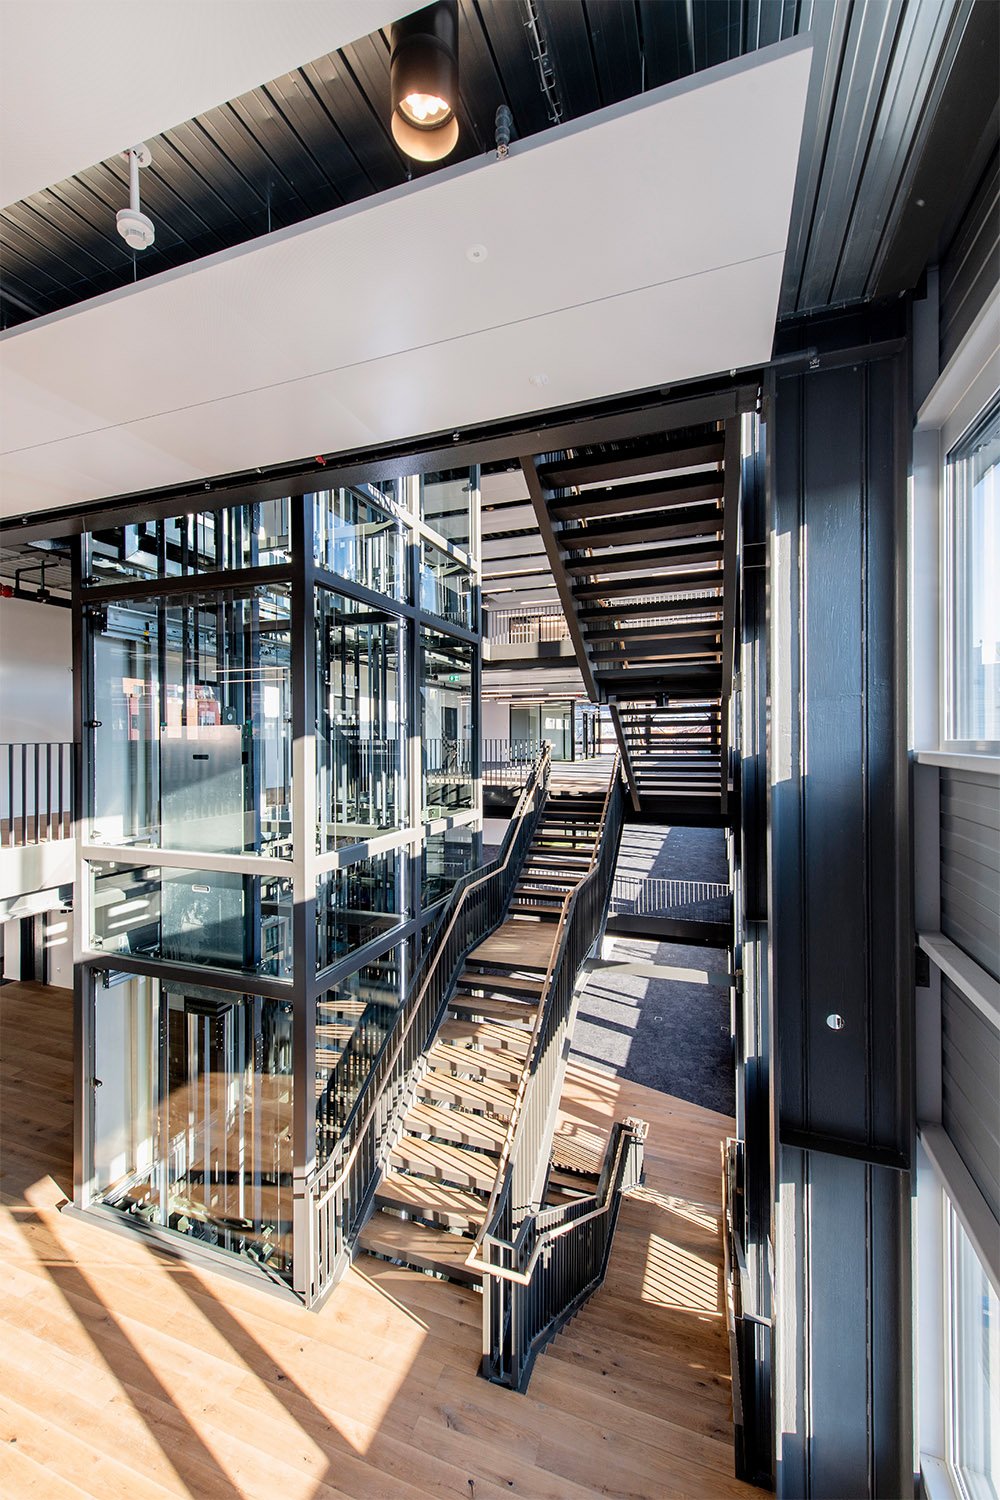 New light-filled atrium connects all floors in the new office building. | Peter Wuermli